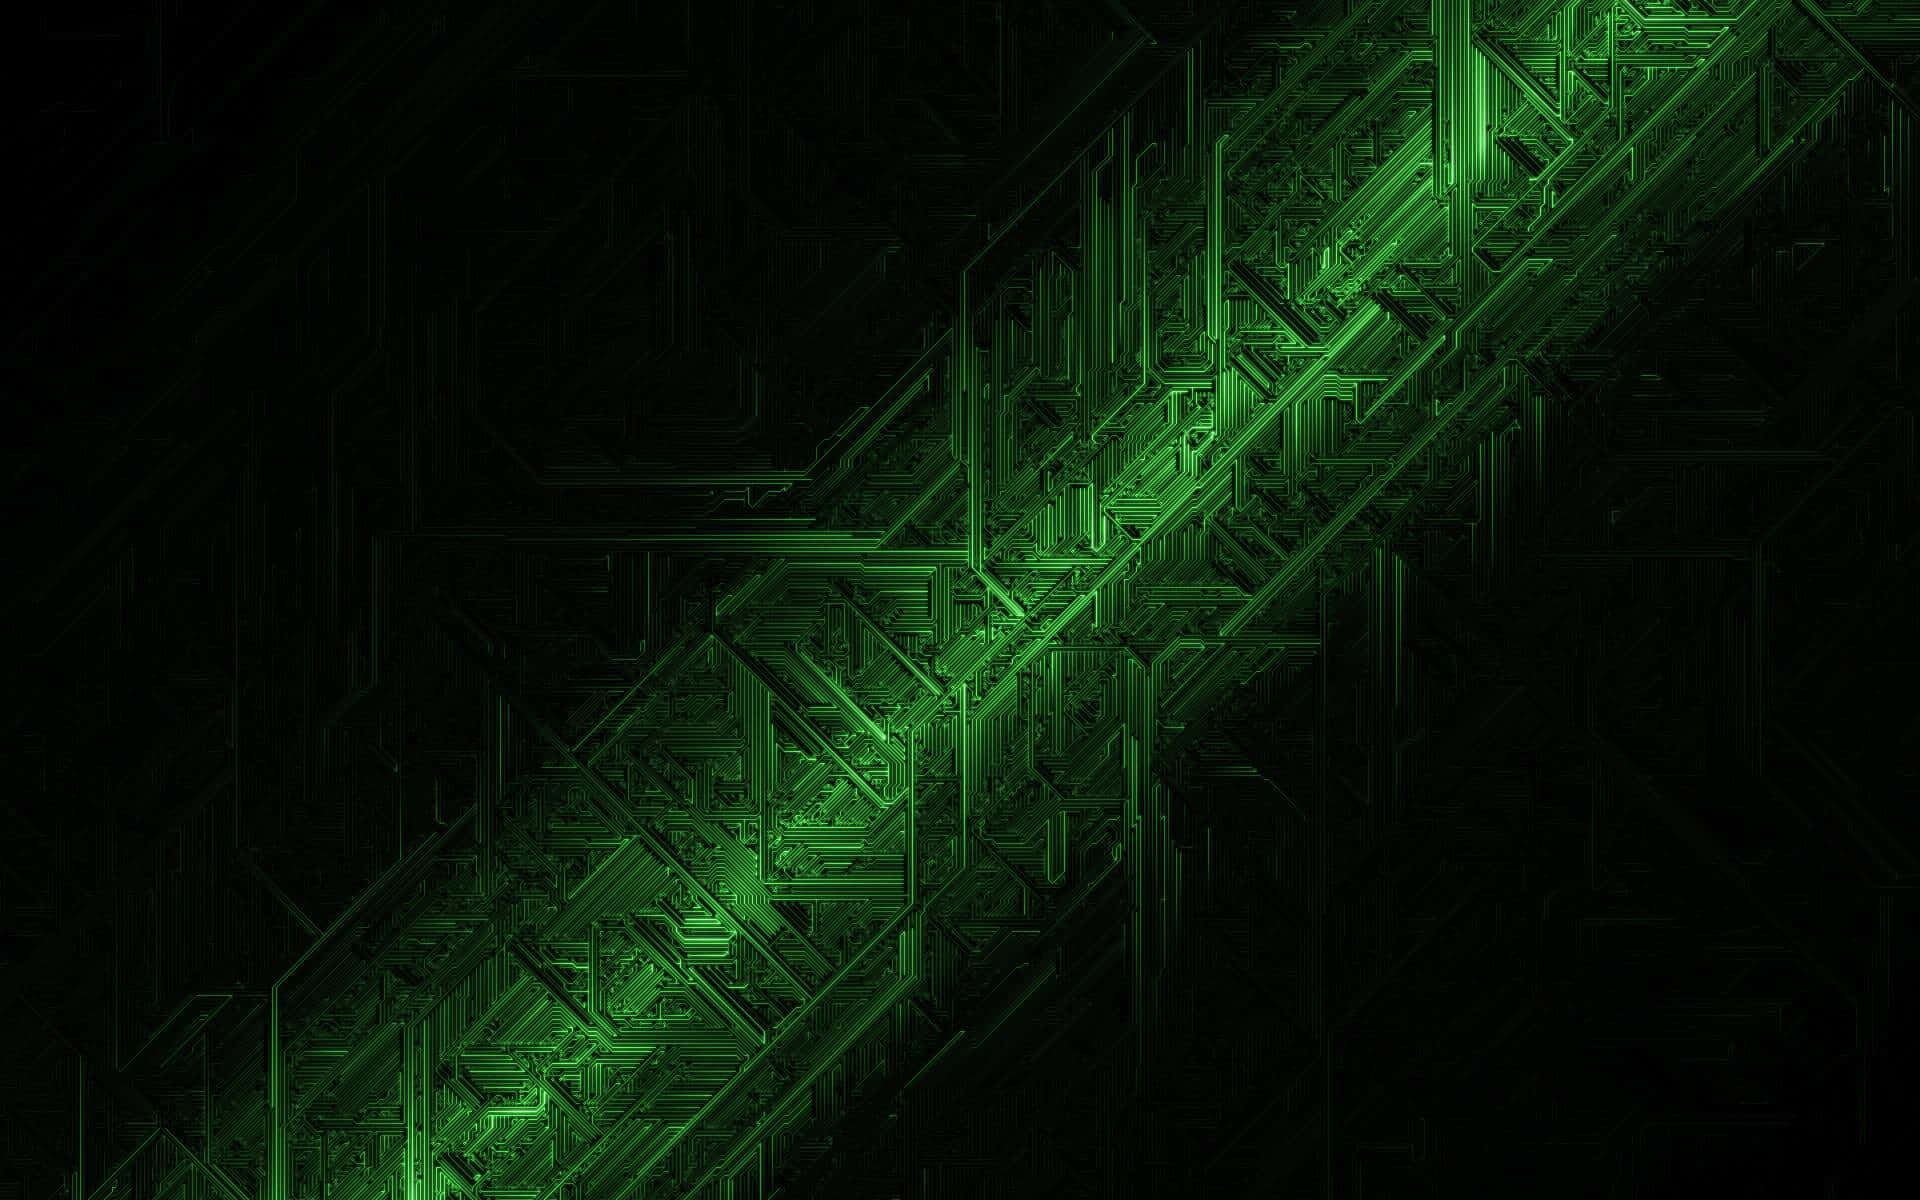 Abstract Black and Green Wallpaper